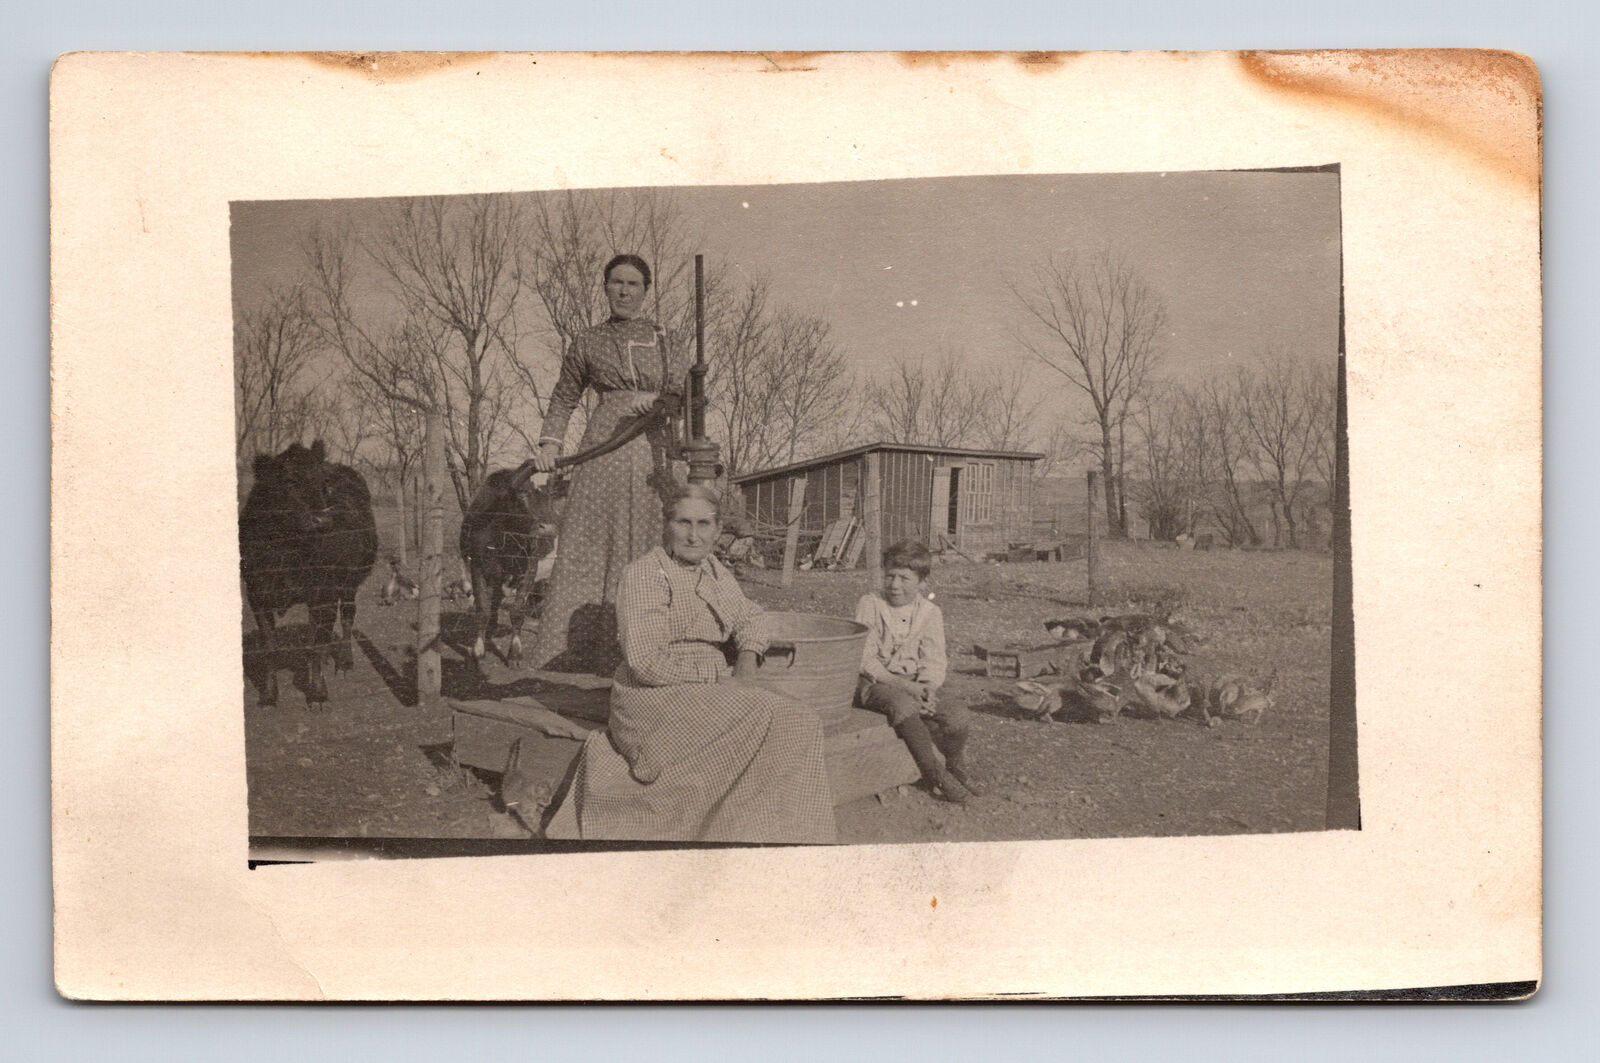 RPPC Grandmother Mother & Son at Farm Cows Hand Water Pump Tyrell Postcard